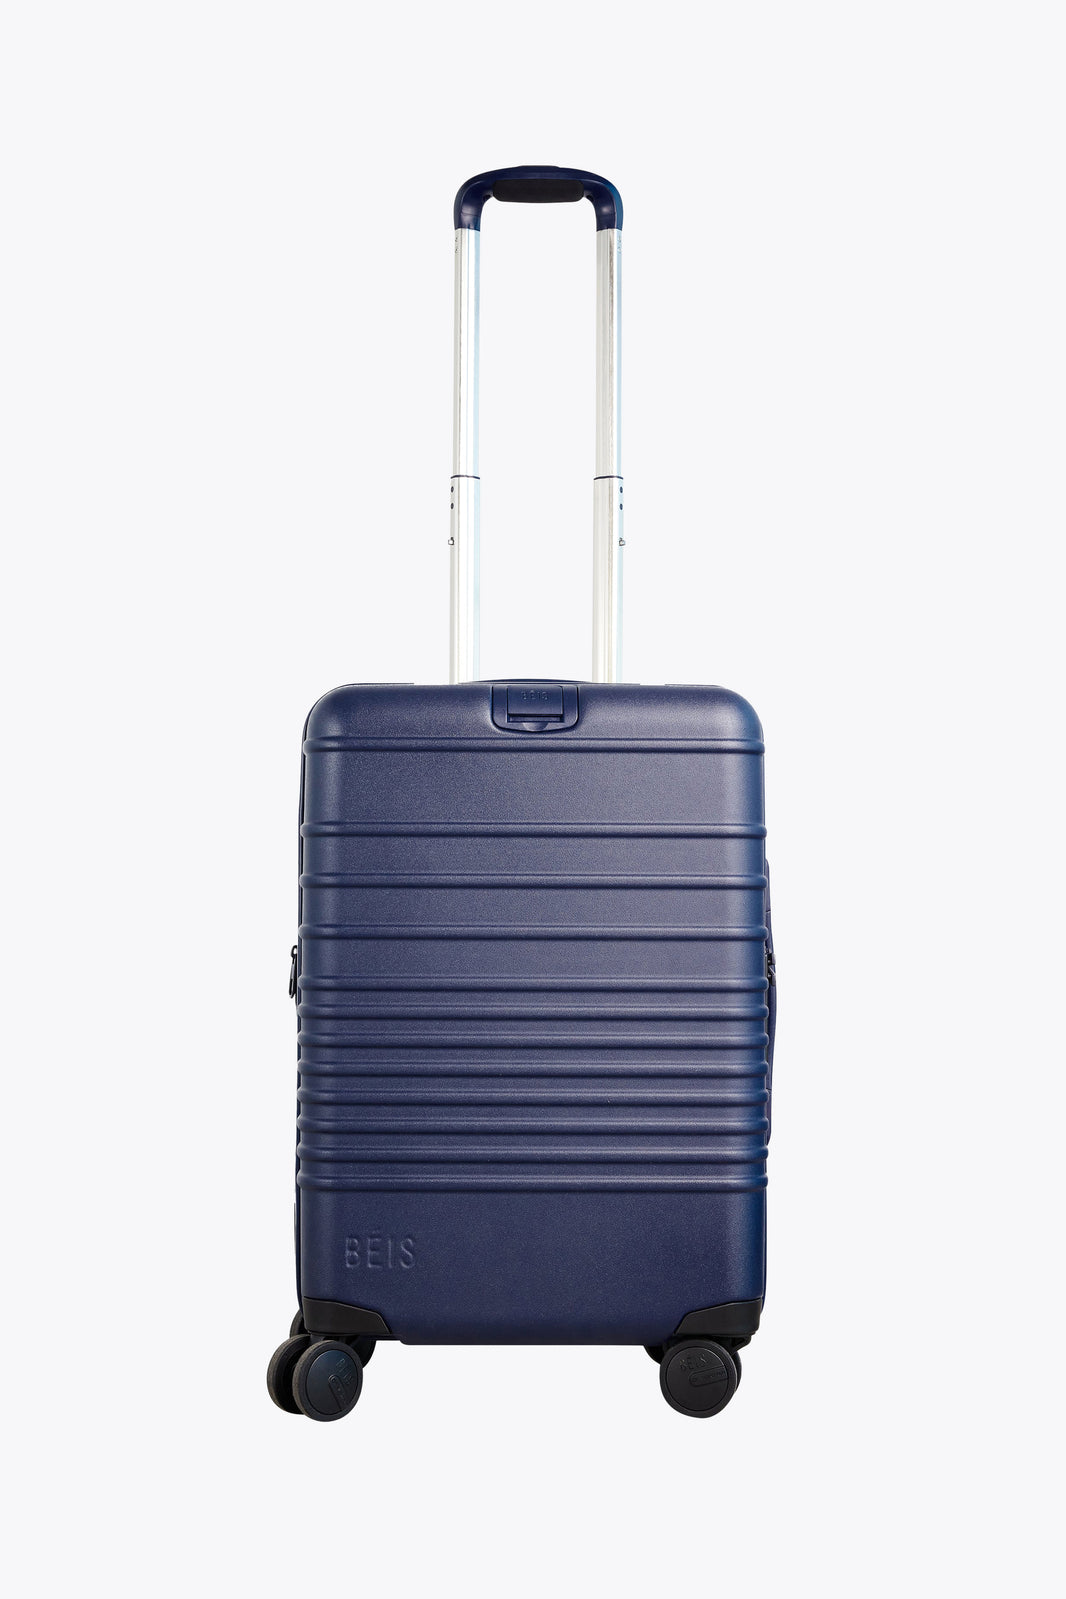 Carry-On Luggage - Hand Luggage & Carry On Suitcases